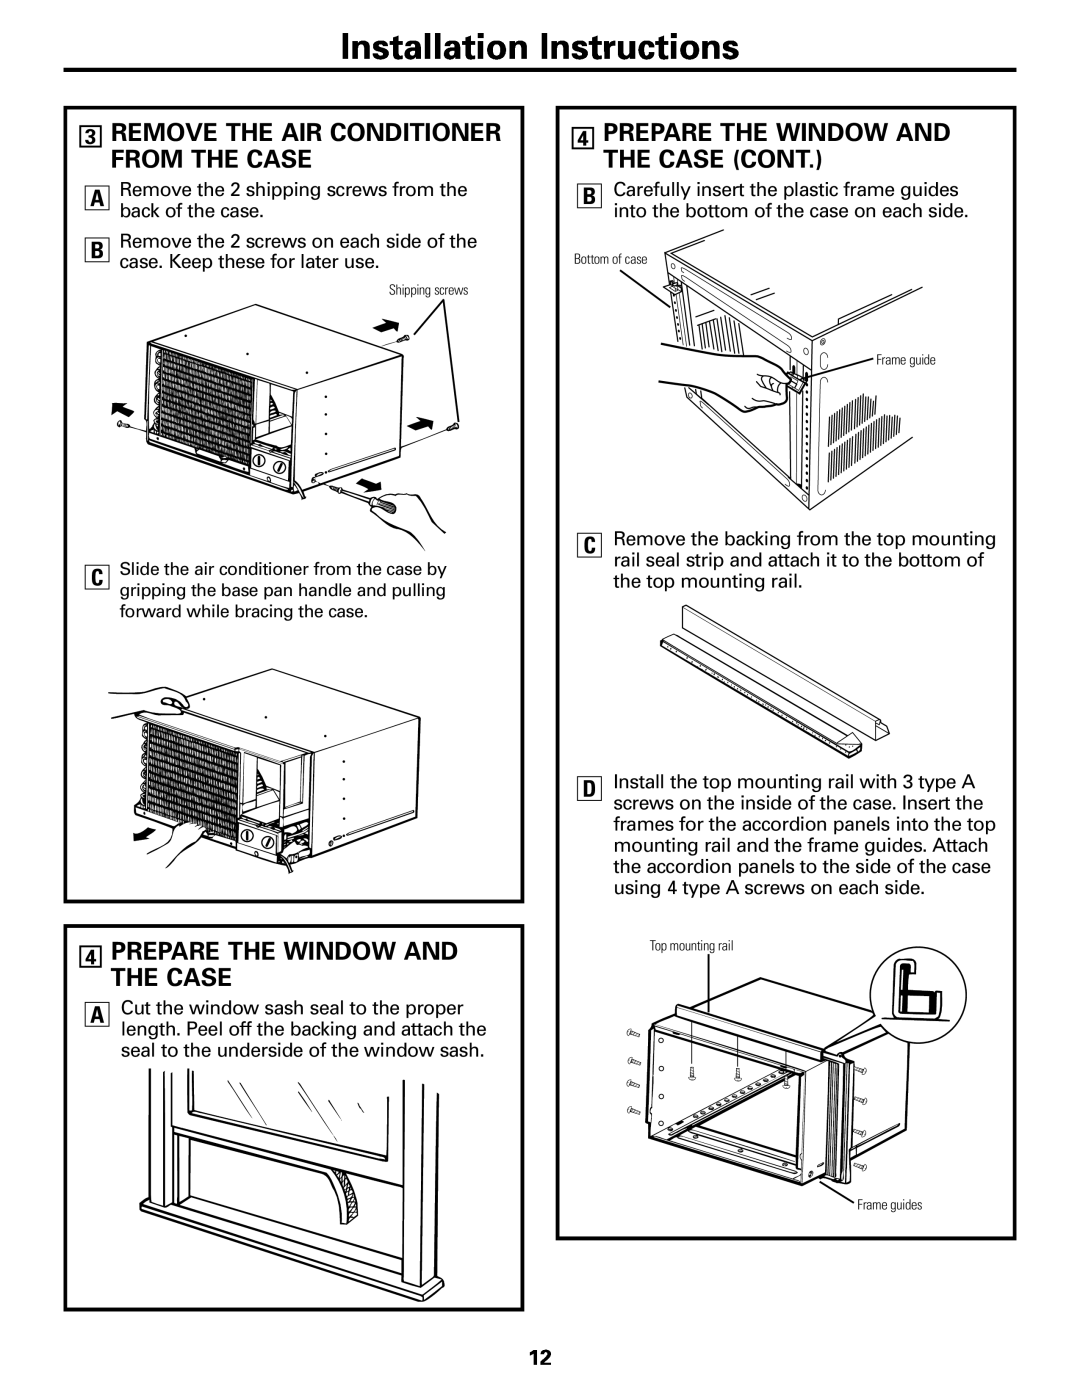 GE AGF14, AGF06 3REMOVE THE AIR CONDITIONER FROM THE CASE, 4PREPARE THE WINDOW AND THE CASE, Installation Instructions 